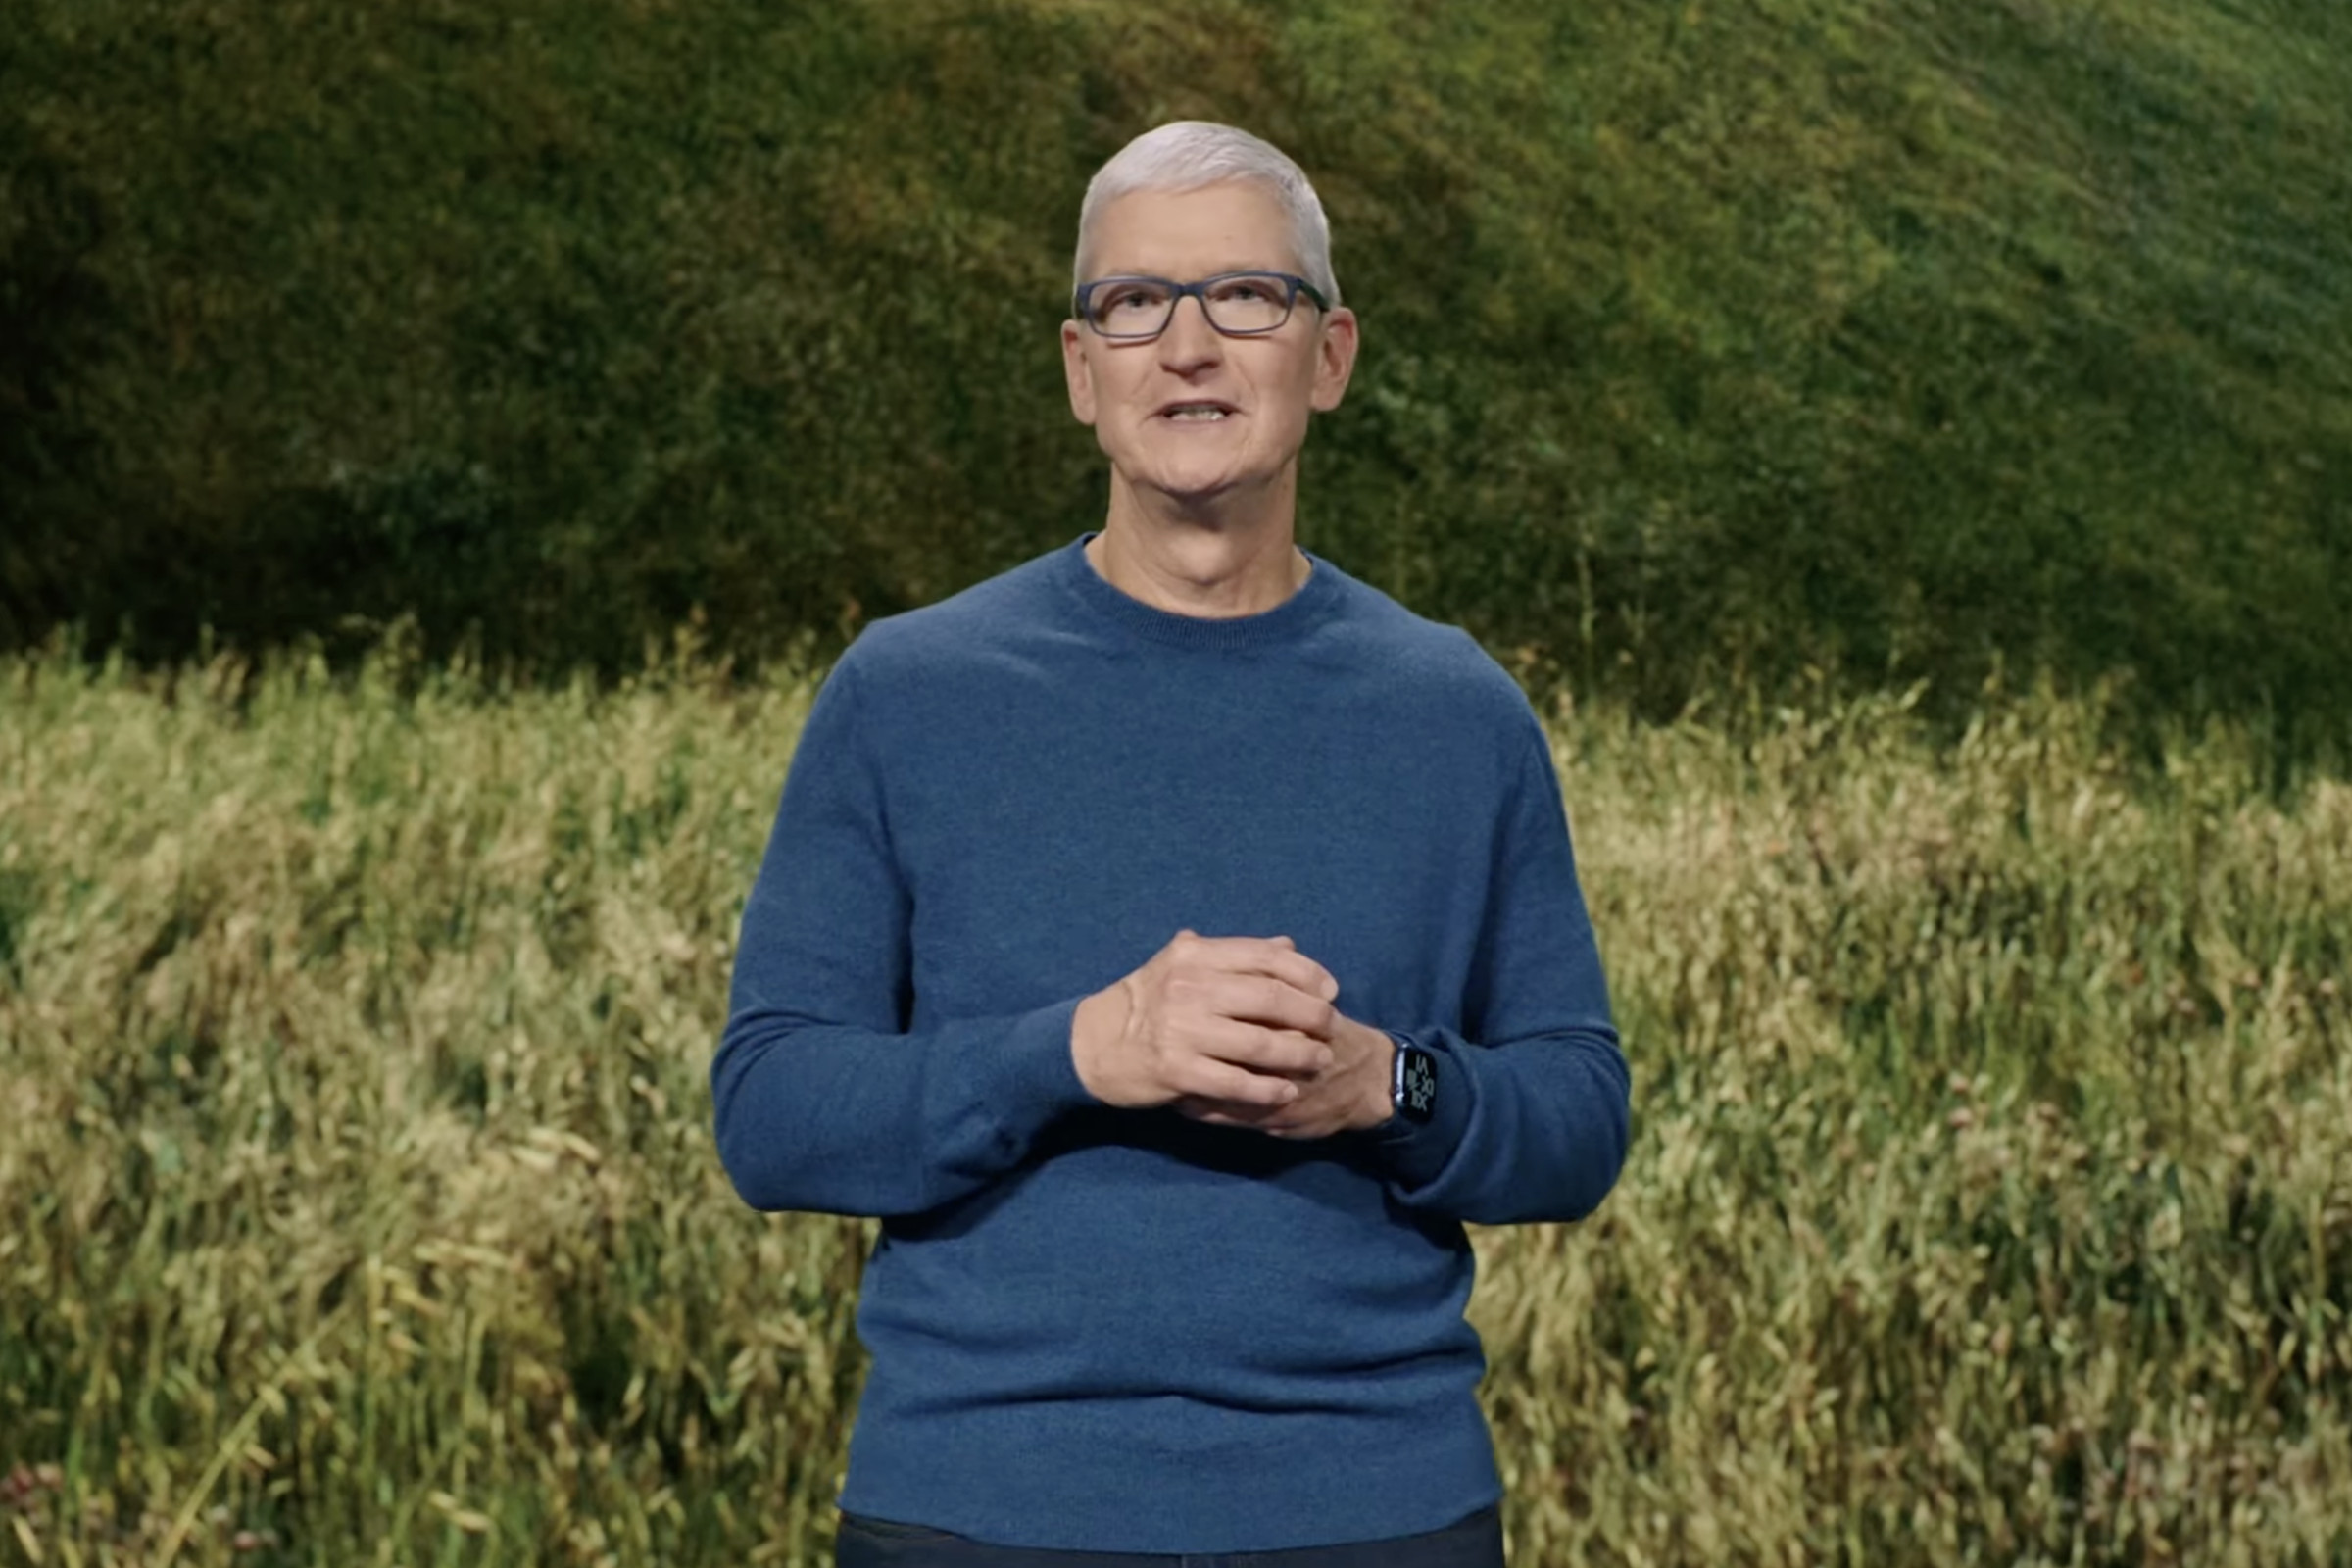 Pictured: Tim Cook, knowing he’s not about to announce the thing I want.